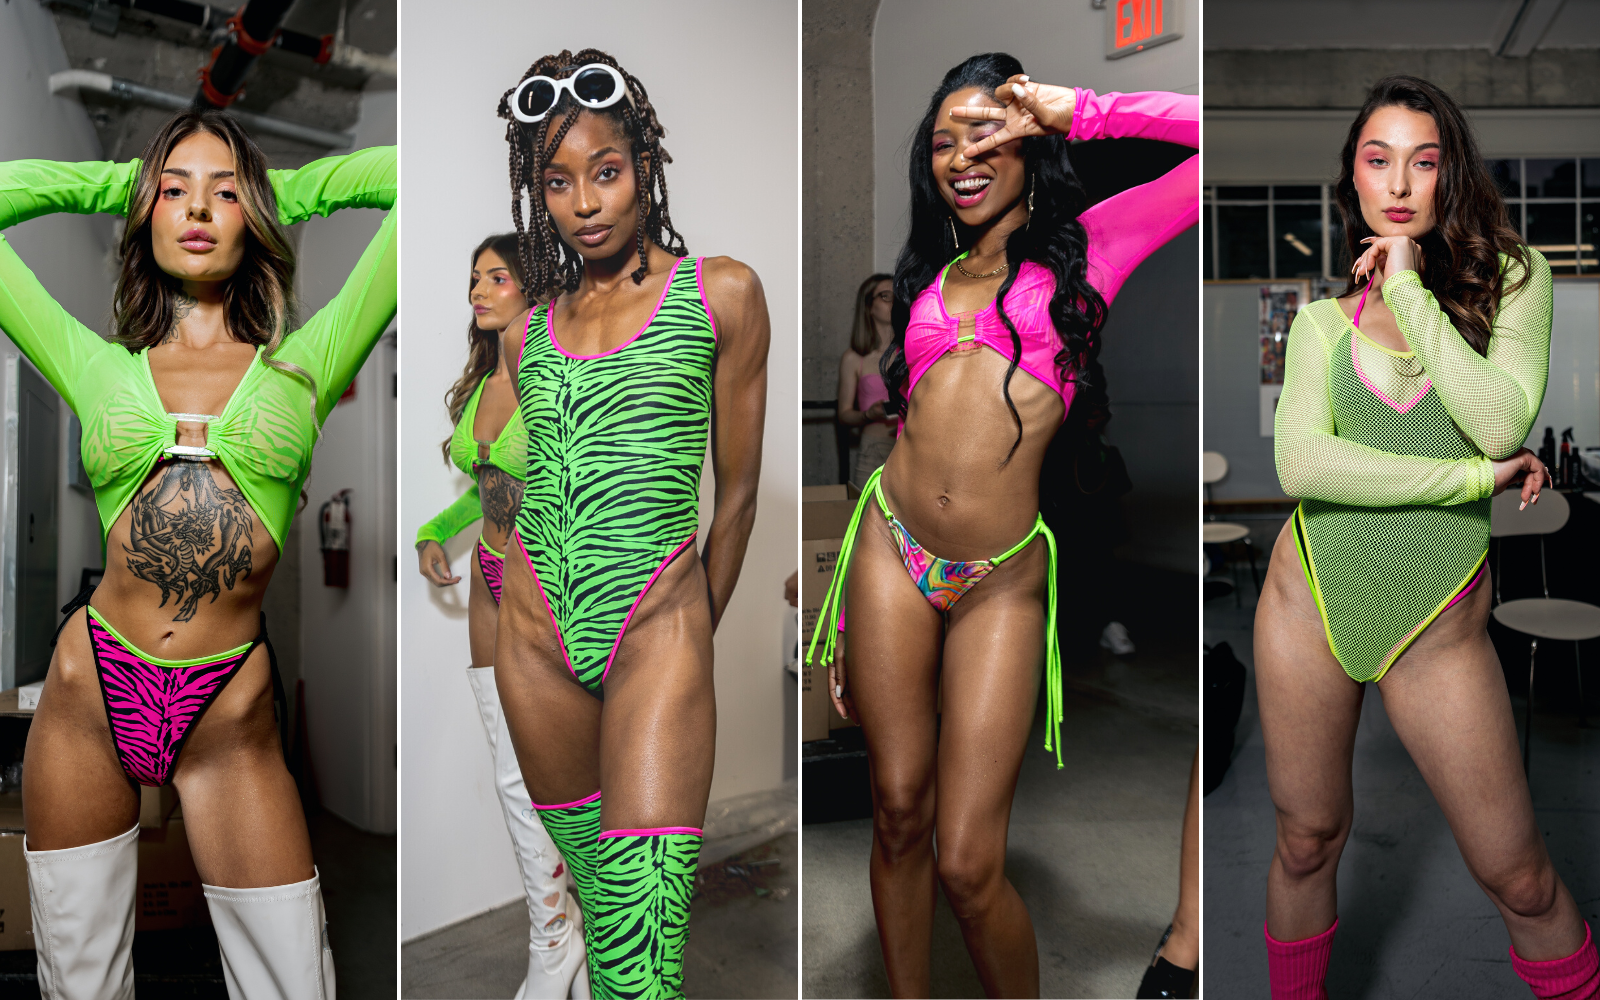 Sugarpuss models caught backstage wearing:  NEON BIKINI WITH TRIANGLE TOP AND HIGHCUT STRING BOTTOMS IN PINK ZEBRA, HIGHCUT ONEPIECE SWIMSUIT WITH THONG BACK IN NEON GREEN ZEBRA WITH BLACK TRIM